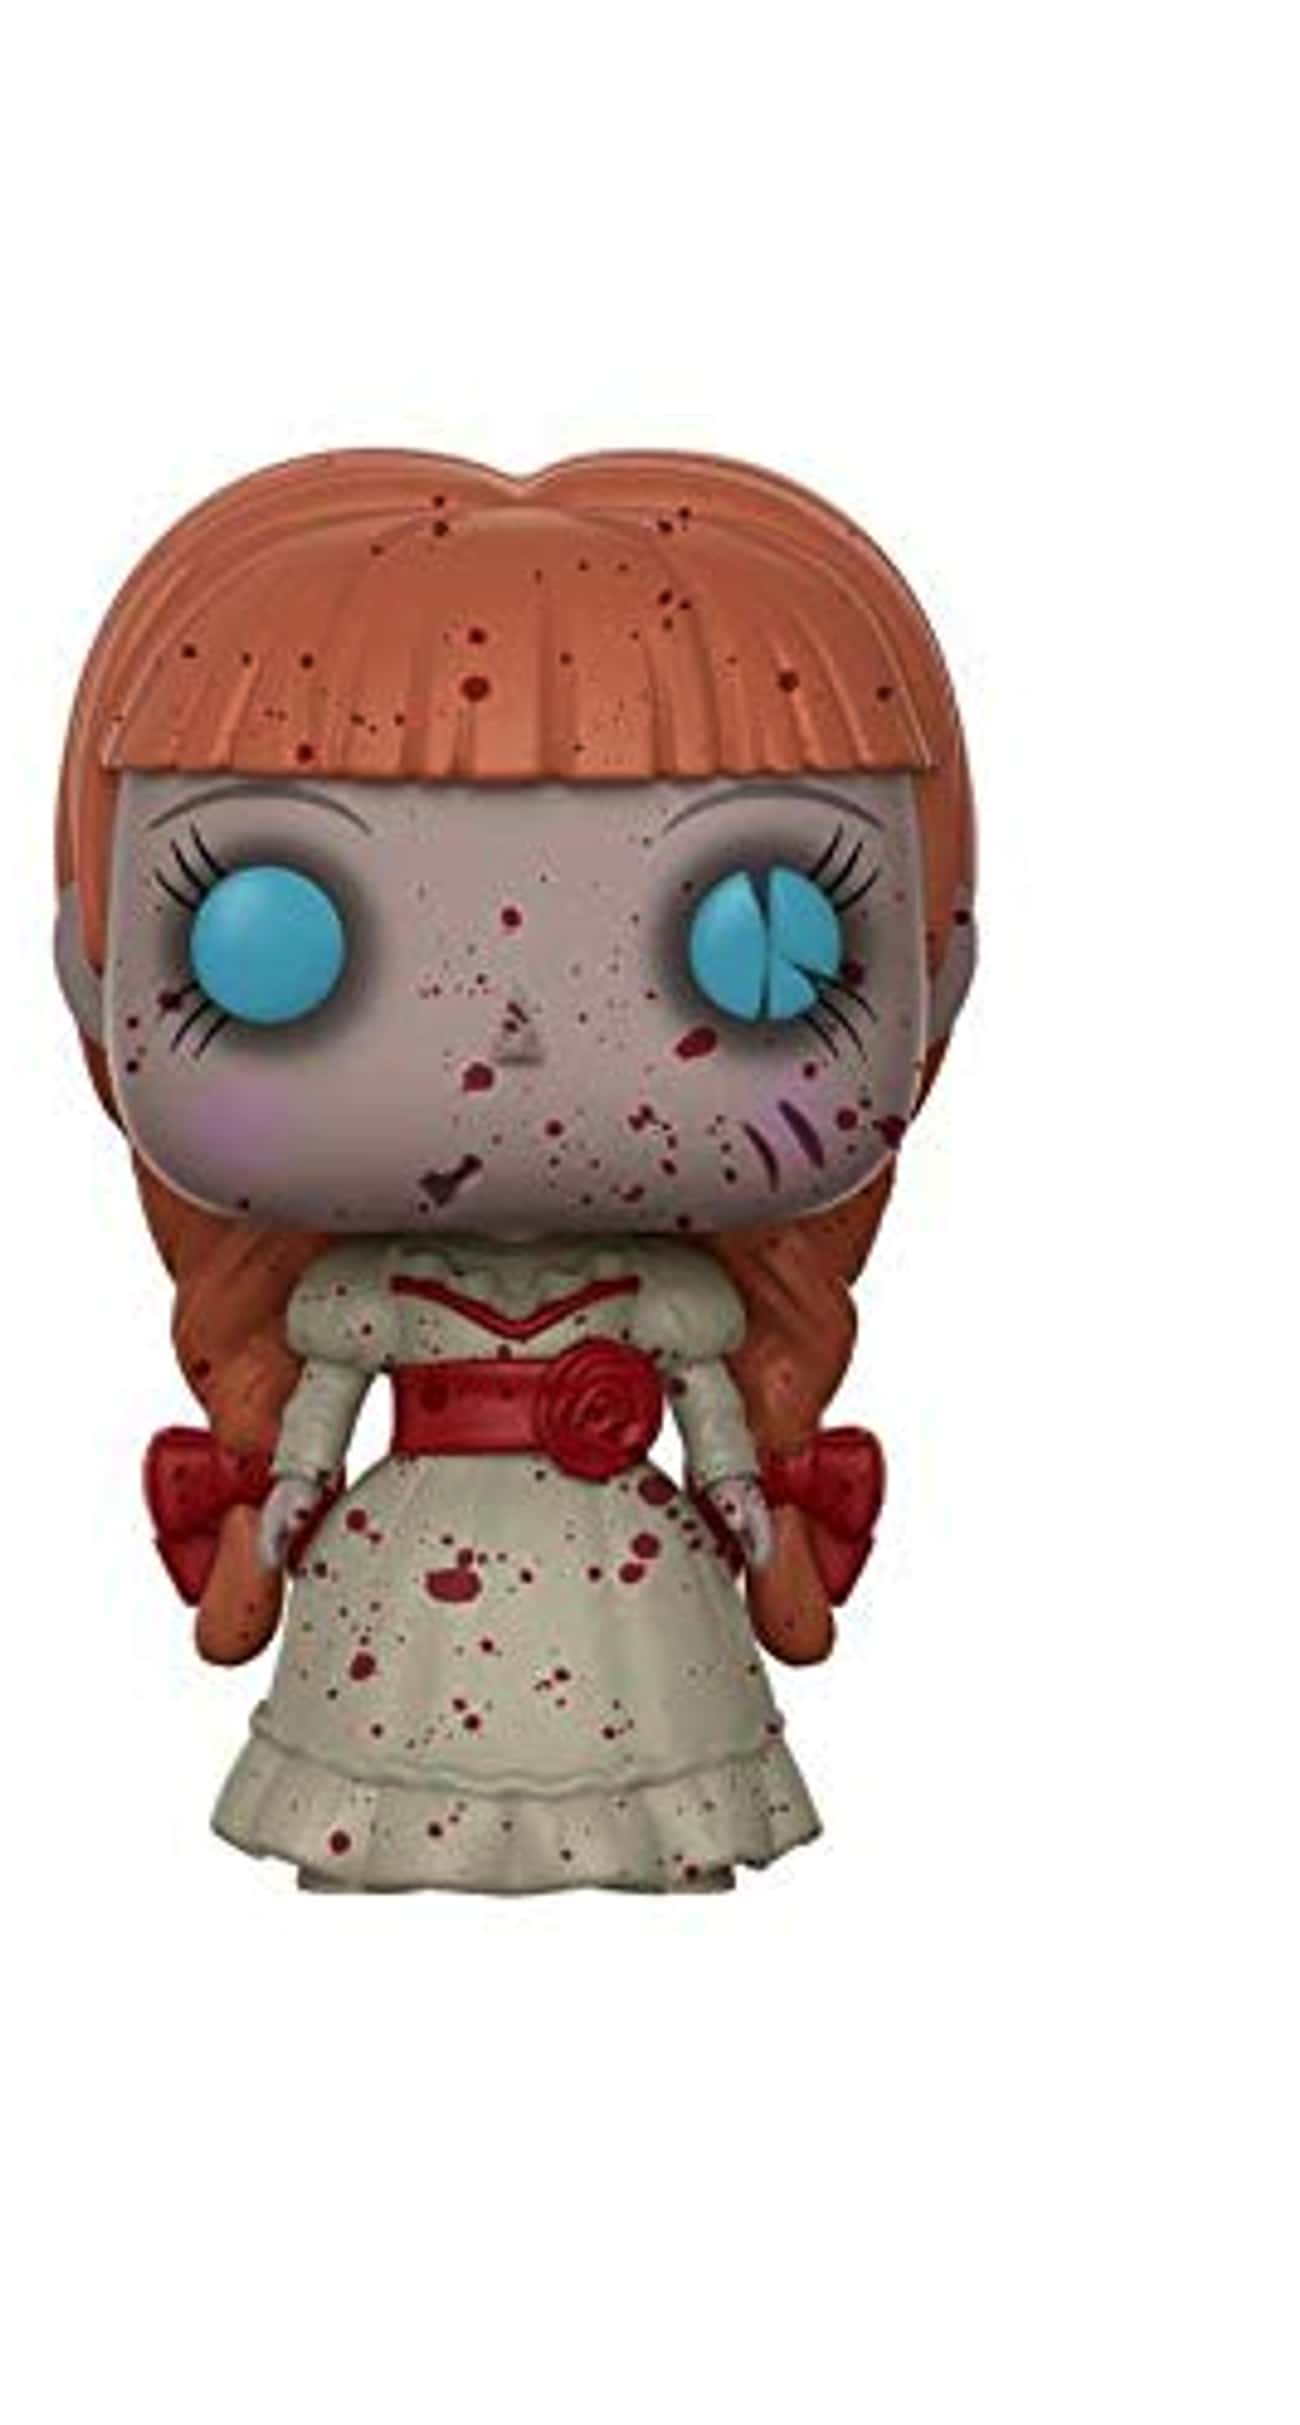 Annabelle Doll From 'The Conjuring' Franchise In Her Bloody Dress